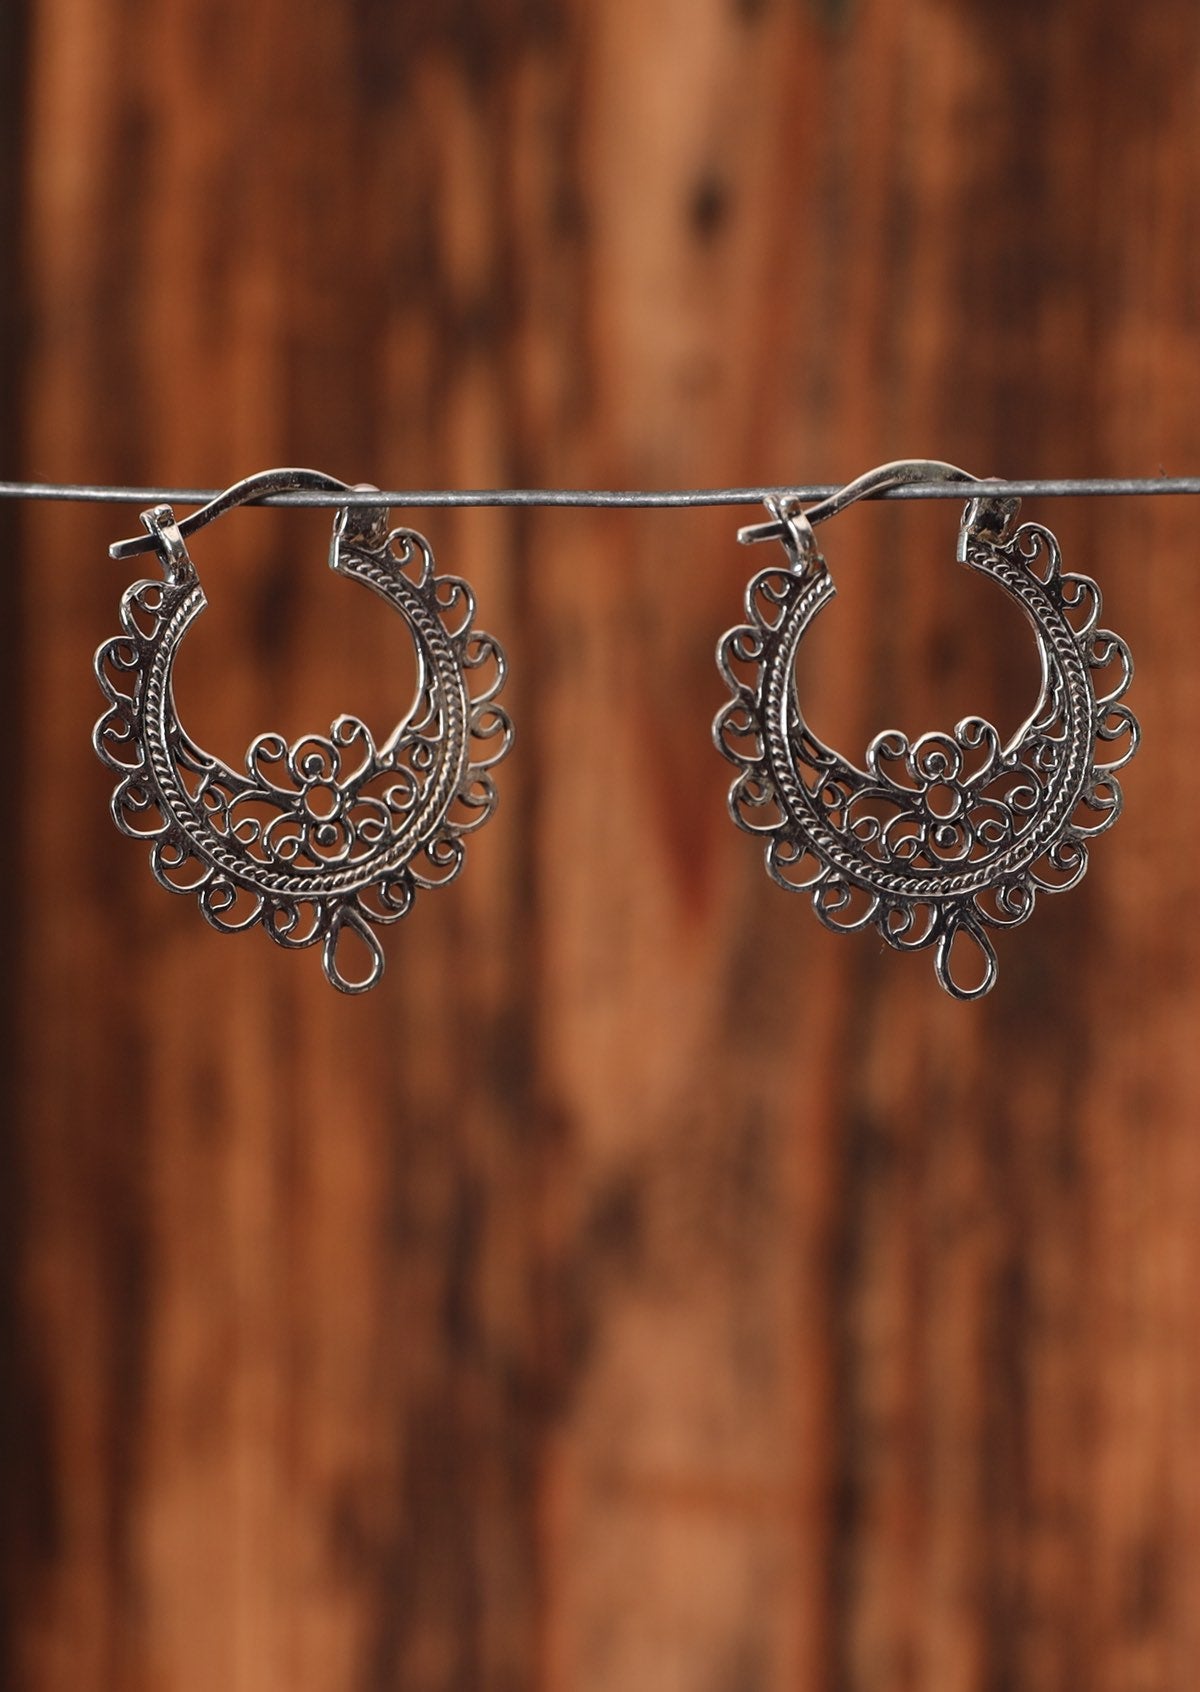 92.5% silver ornate hoops sit on a wire for display.